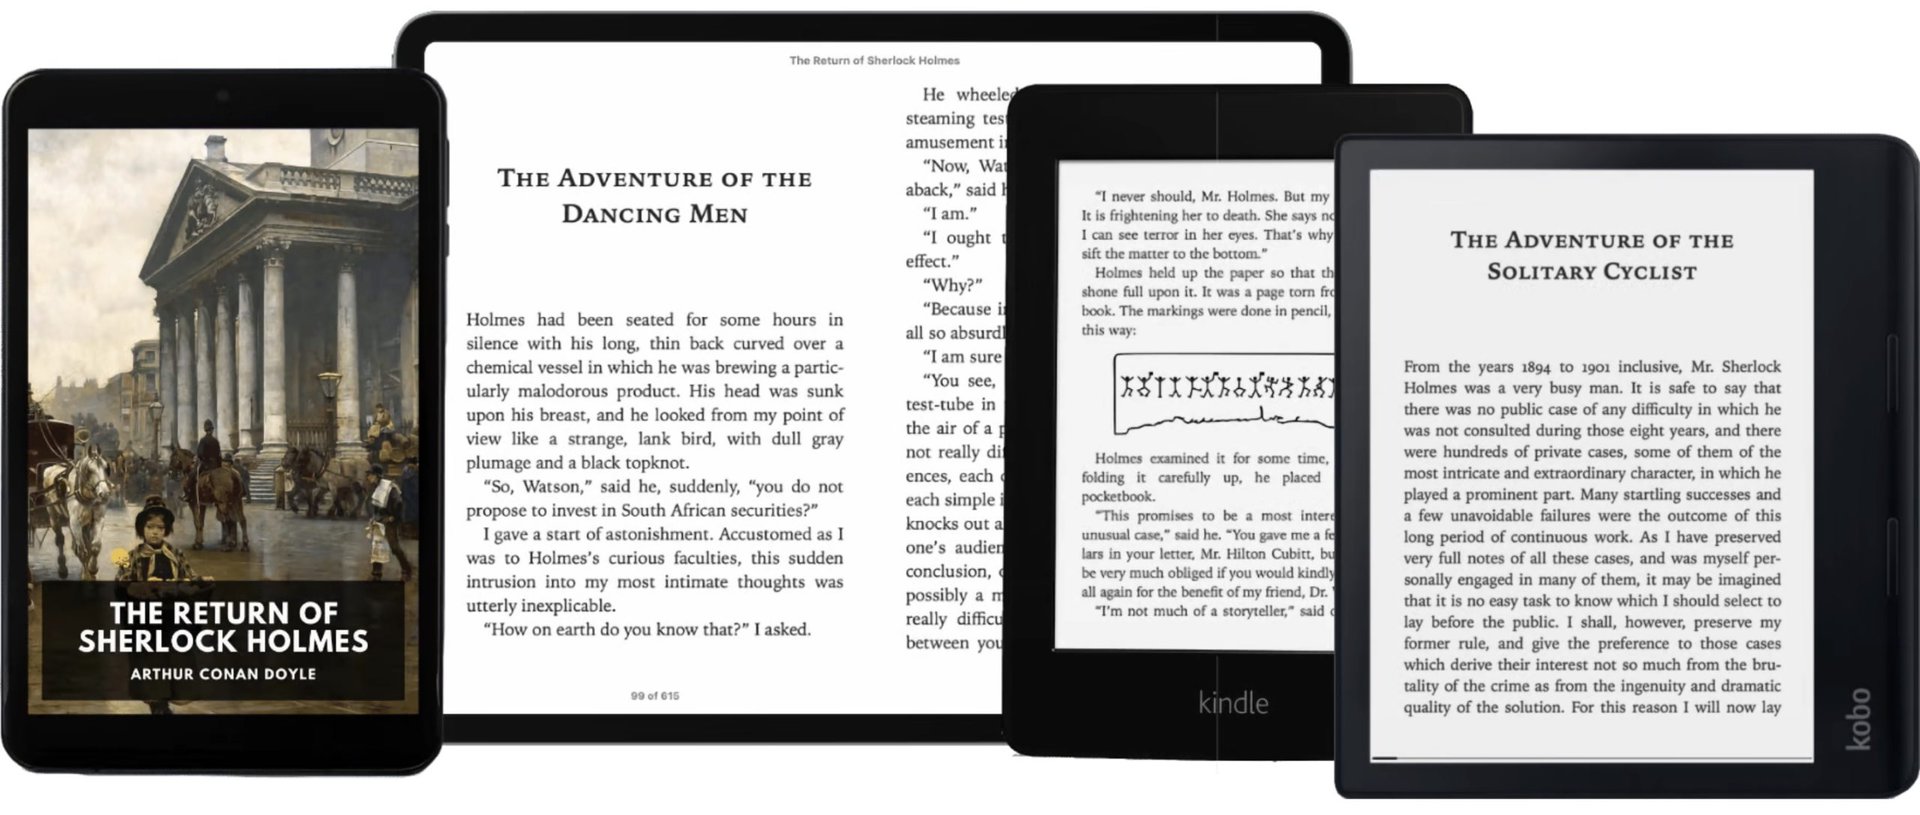 How to download and upload books to a PocketBook e-reader?